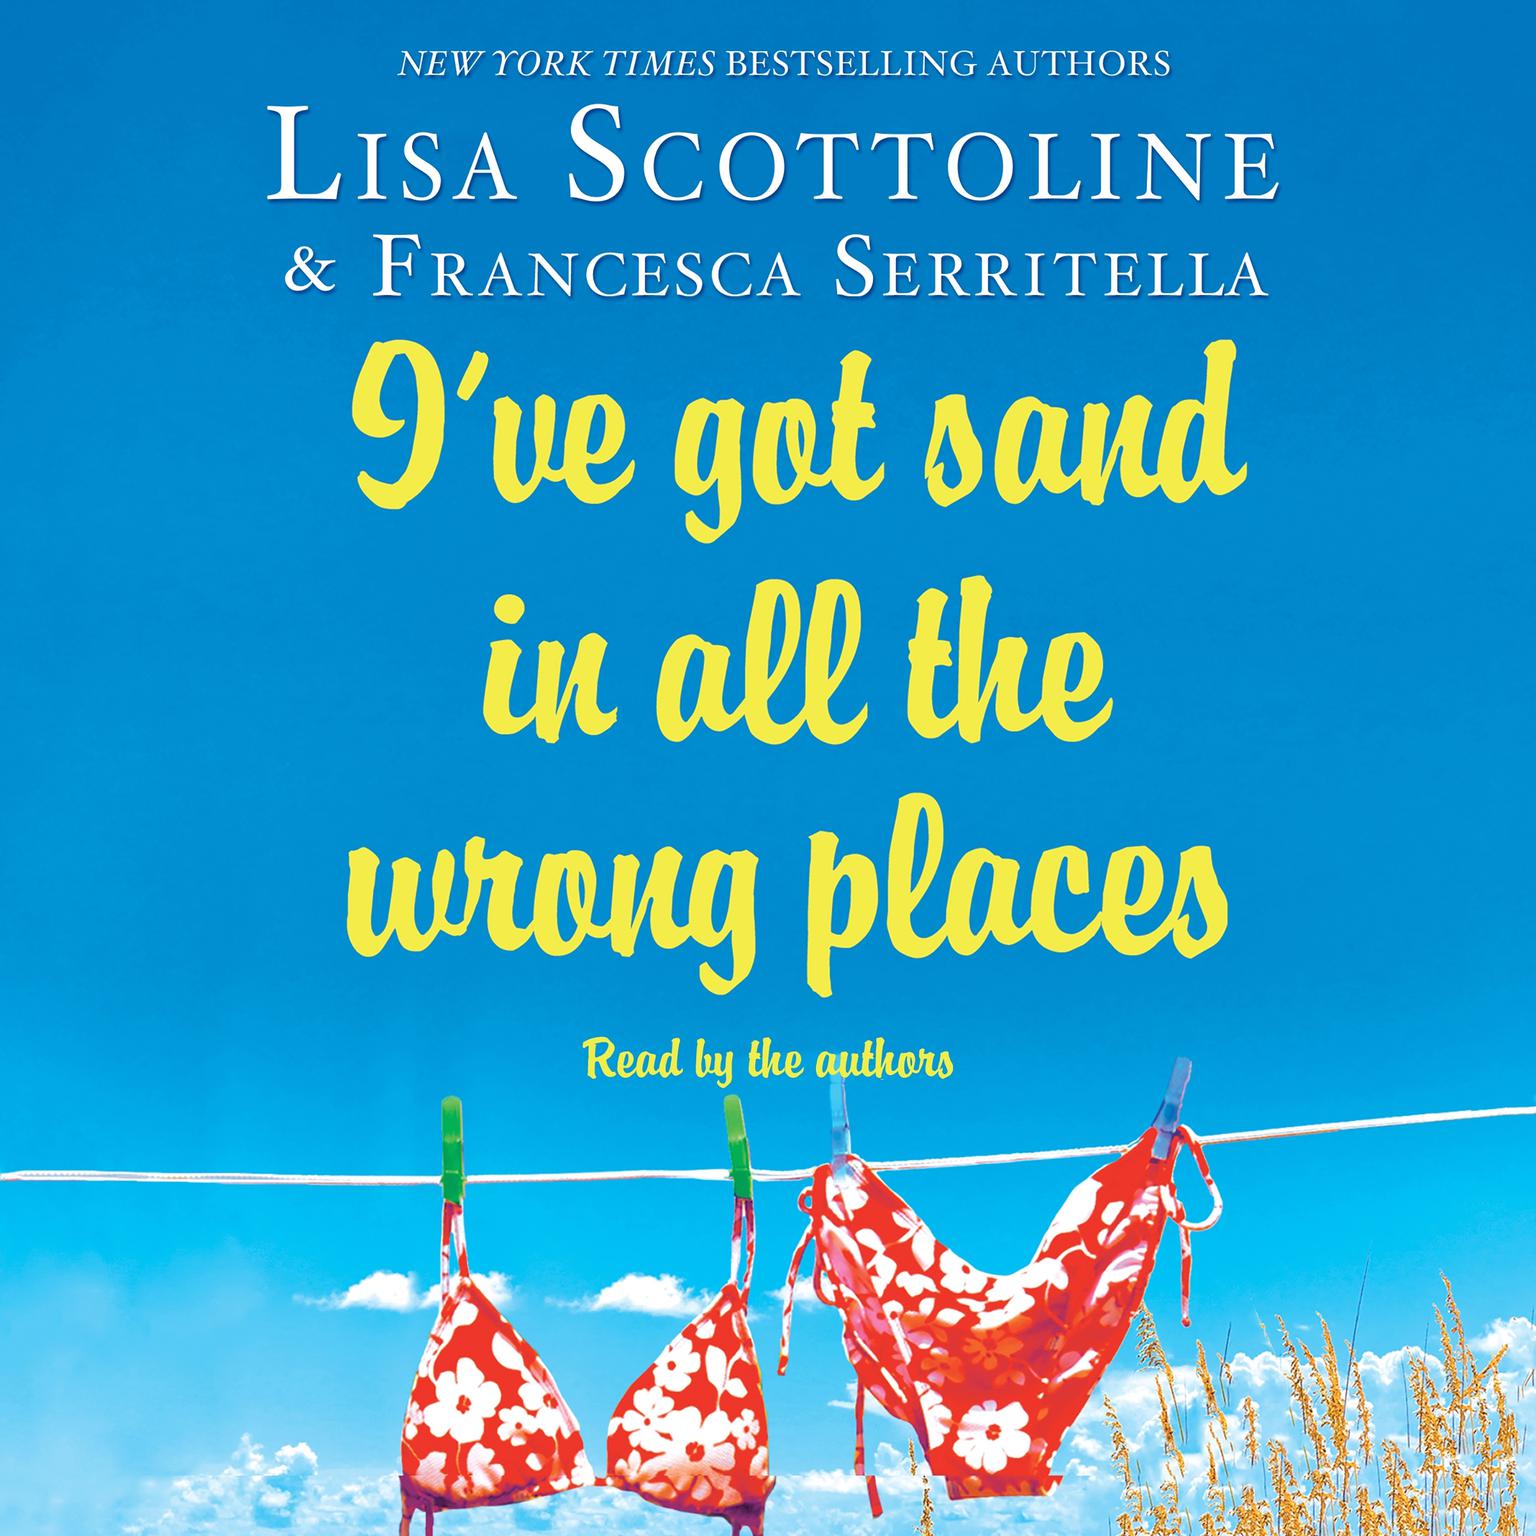 Ive Got Sand In All the Wrong Places Audiobook, by Lisa Scottoline